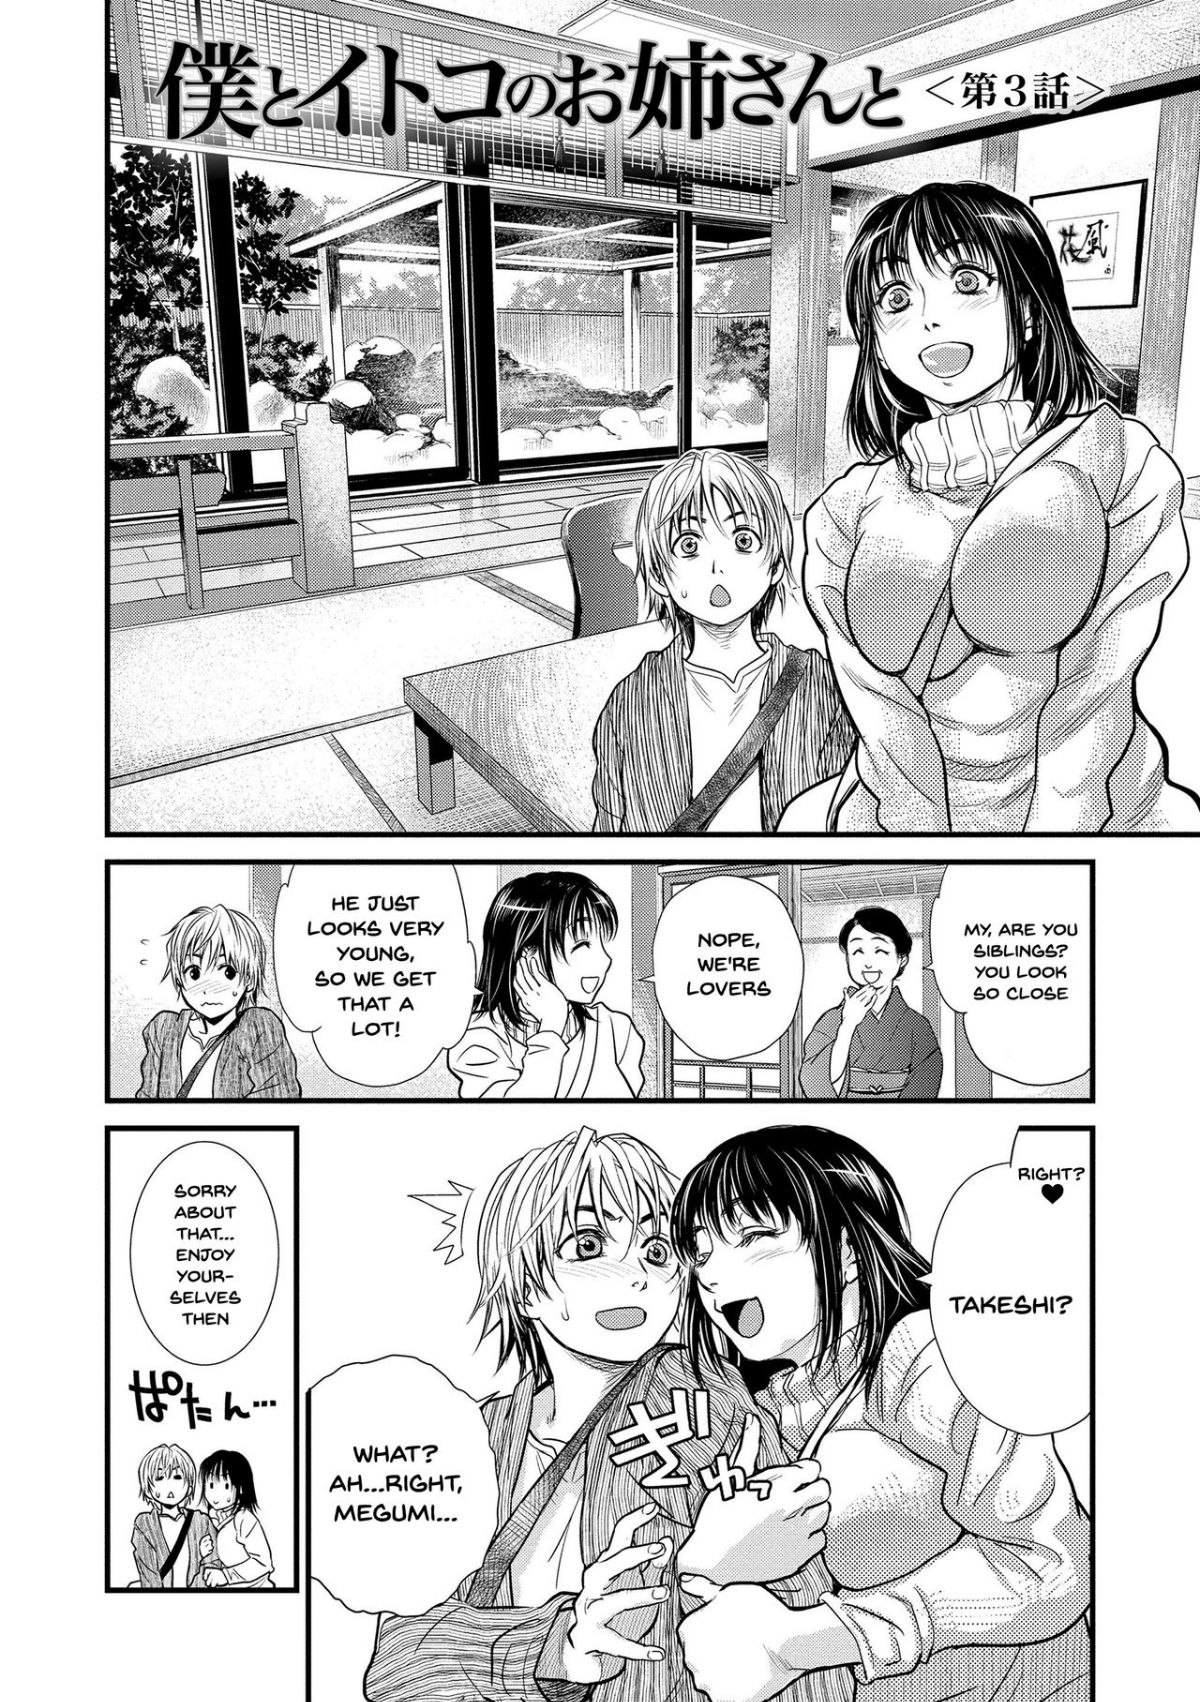 Together With My Older Cousin part 3 Hentai english 01